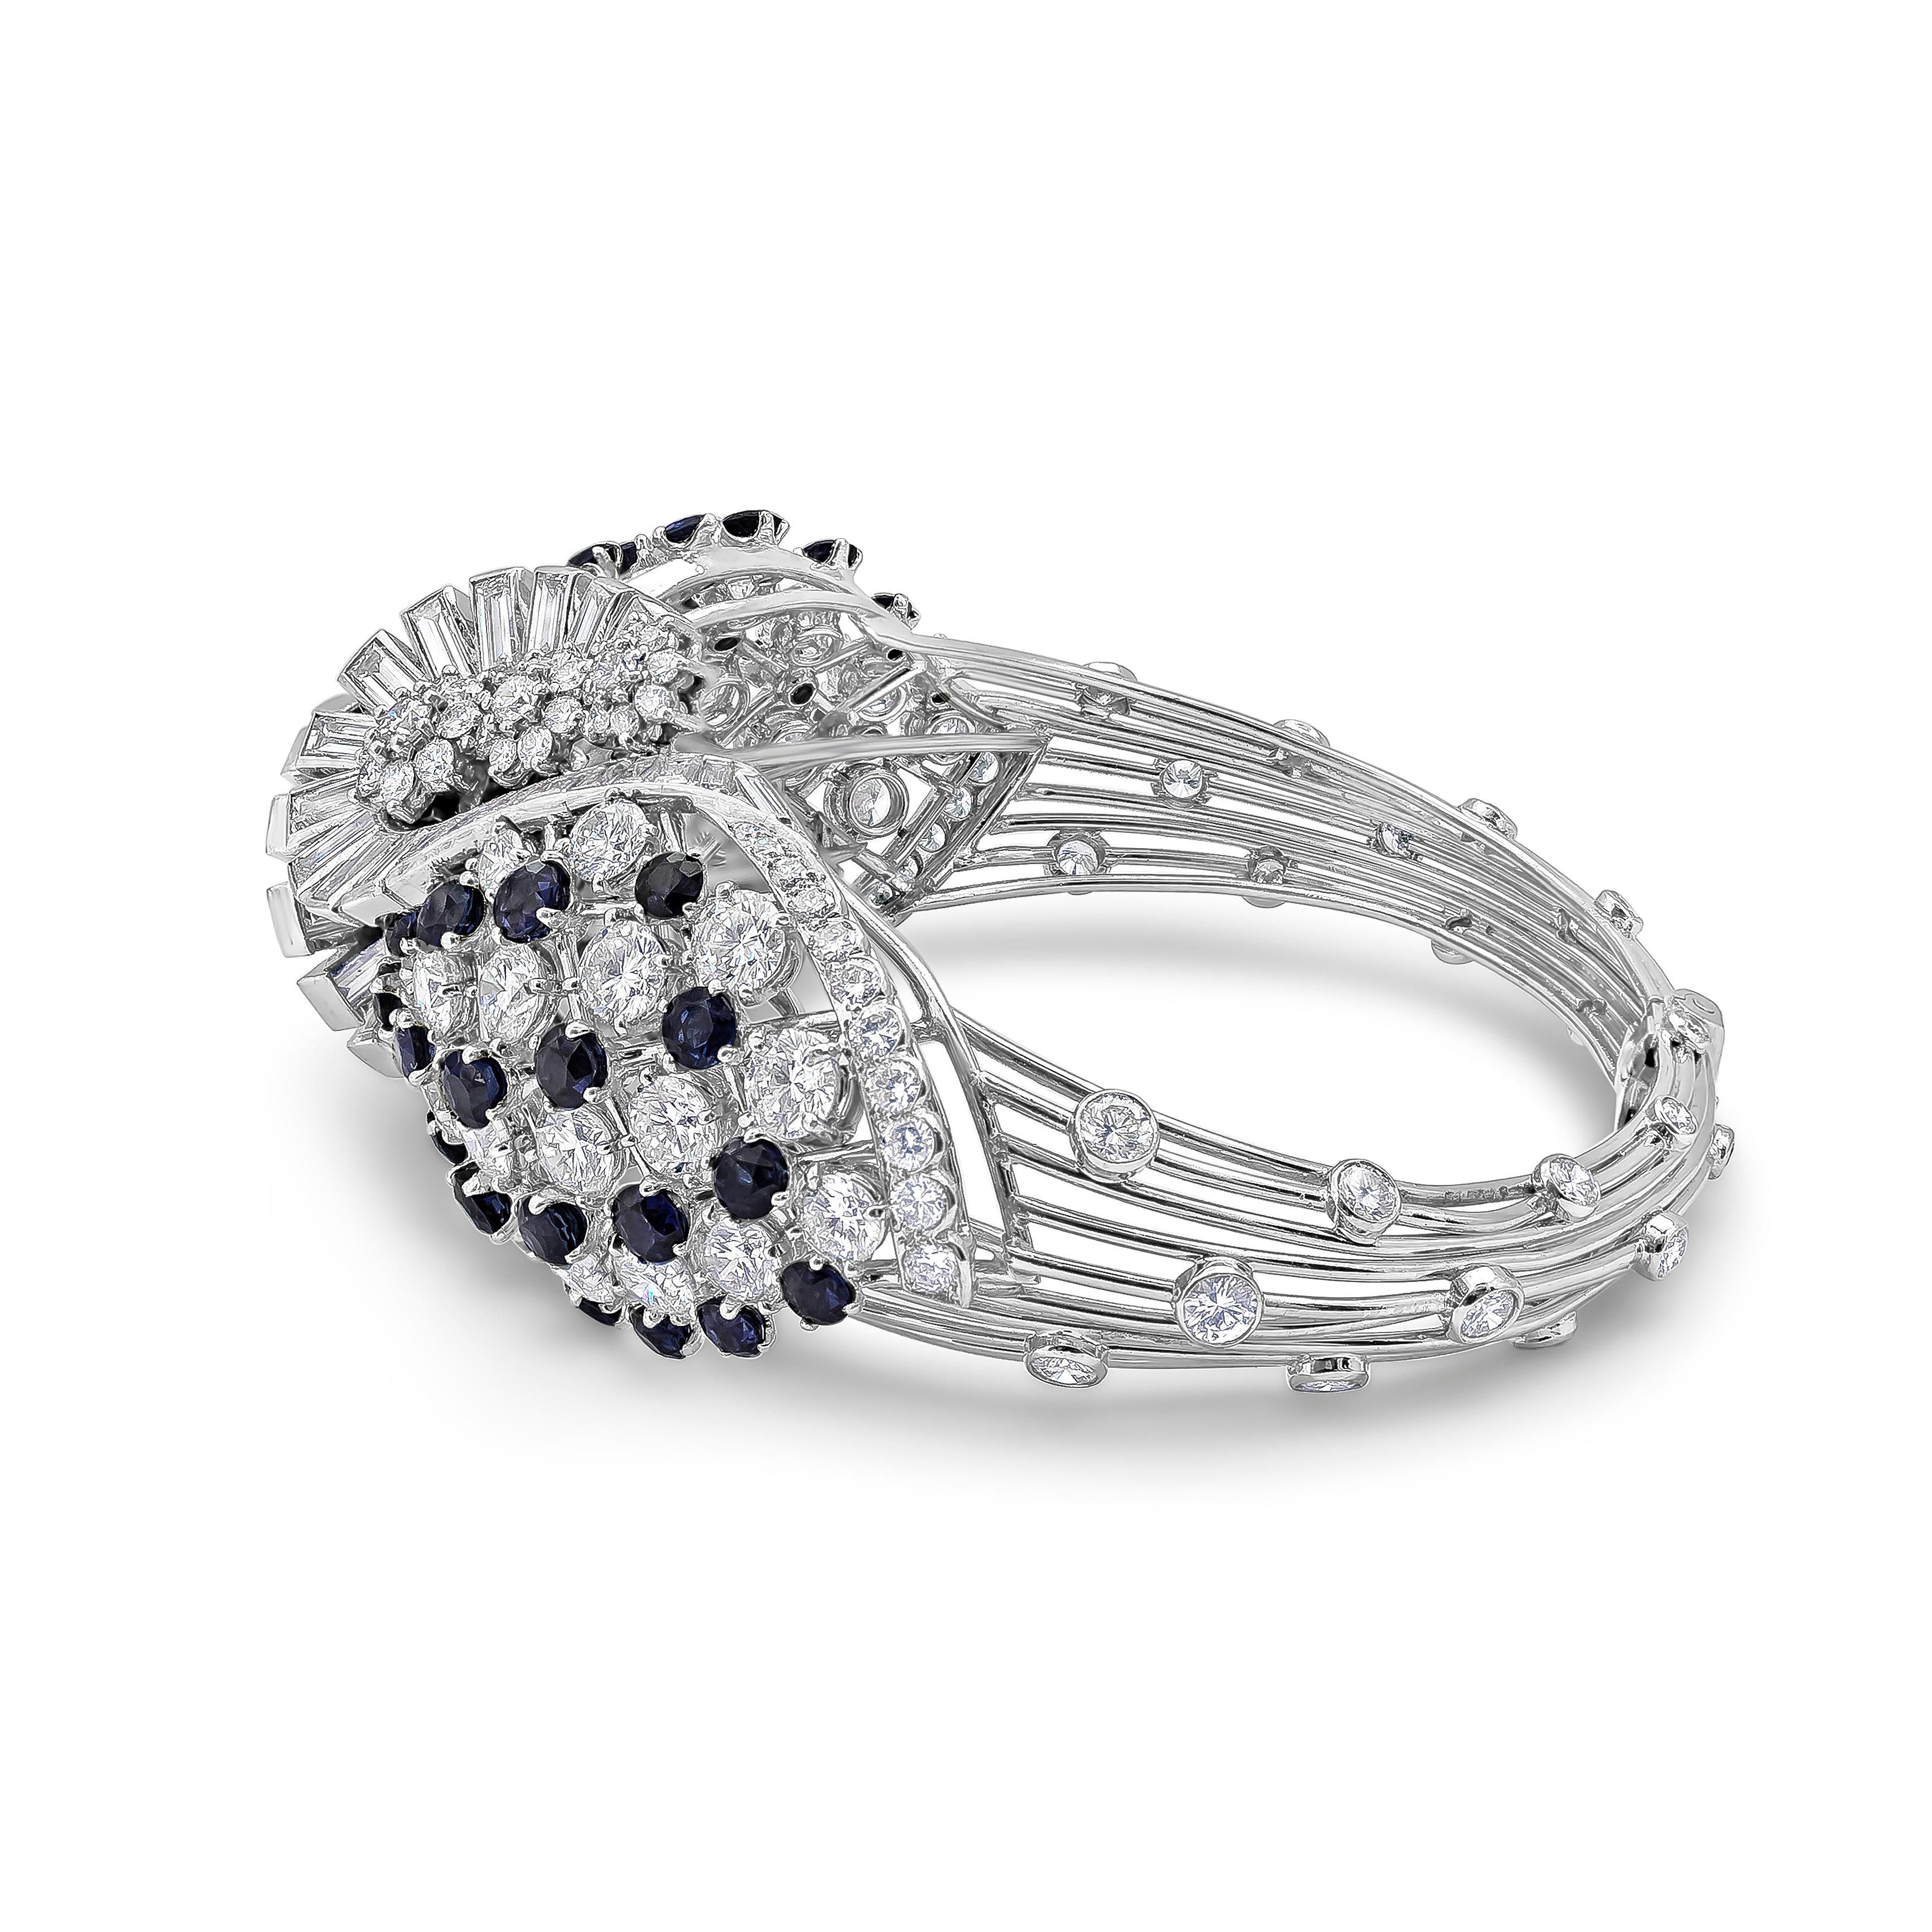 An intricately designed bracelet that is also collapsible to turn it into a brooch. Set with round brilliant and baguette diamonds weighing 20.04 carats total, accented by blue sapphires weighing 7.04 carats total. Made in 18k white gold.